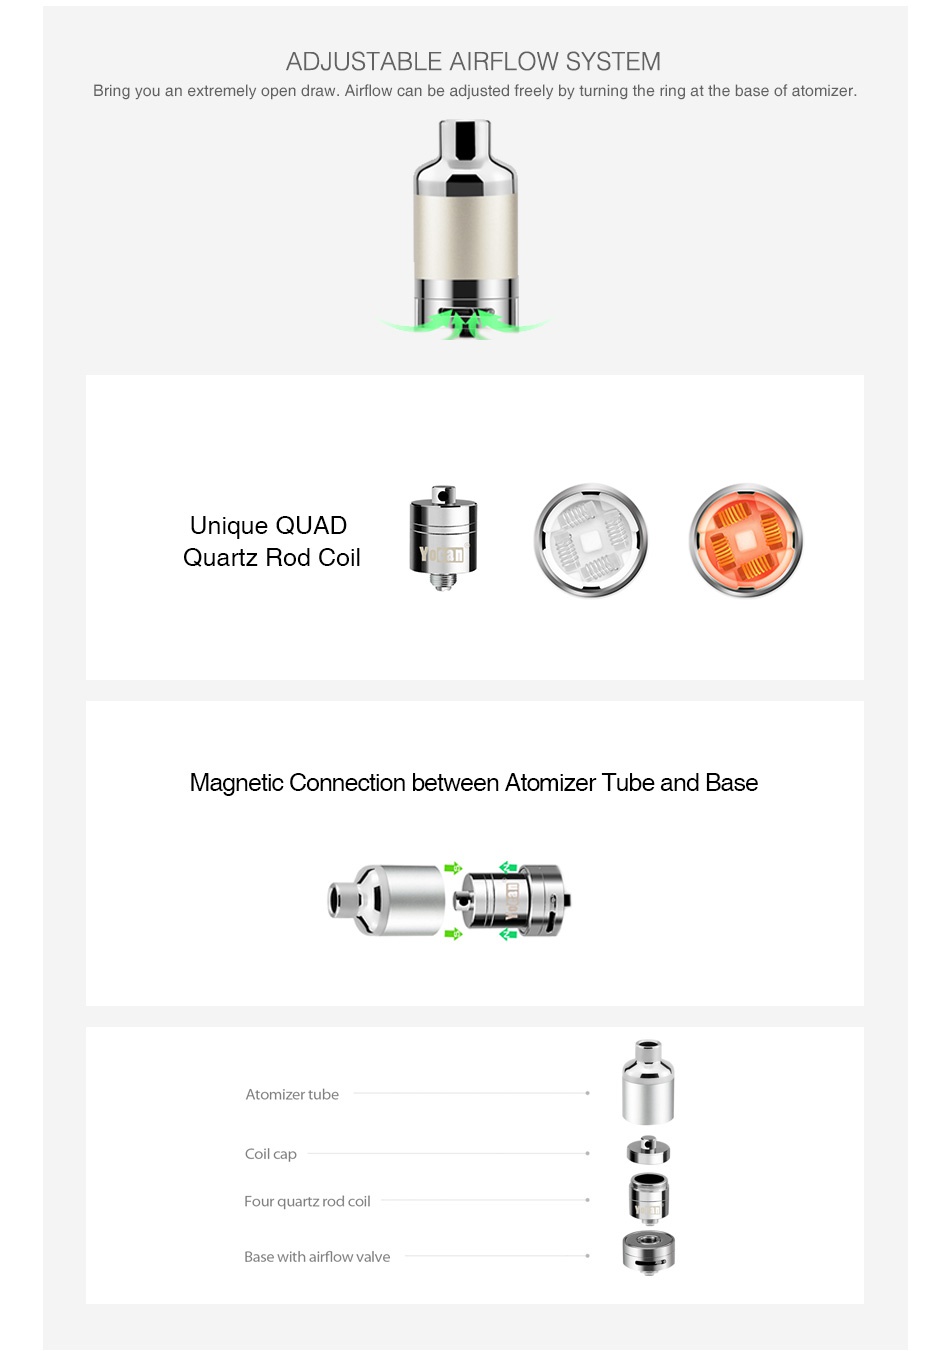 Yocan Evolve Plus XL Atomizer ADJUSTABLE AIRFLOW SYSTEM ing you an extremely open draw  Airflow can be adjusted freely by turning the ring at the base of atomizer Unique QUAD Quartz Rod coil Magnetic Connection between Atomizer Tube and Base Atomizer tube Coil cap Four quartz rod co T Base with airflow valve